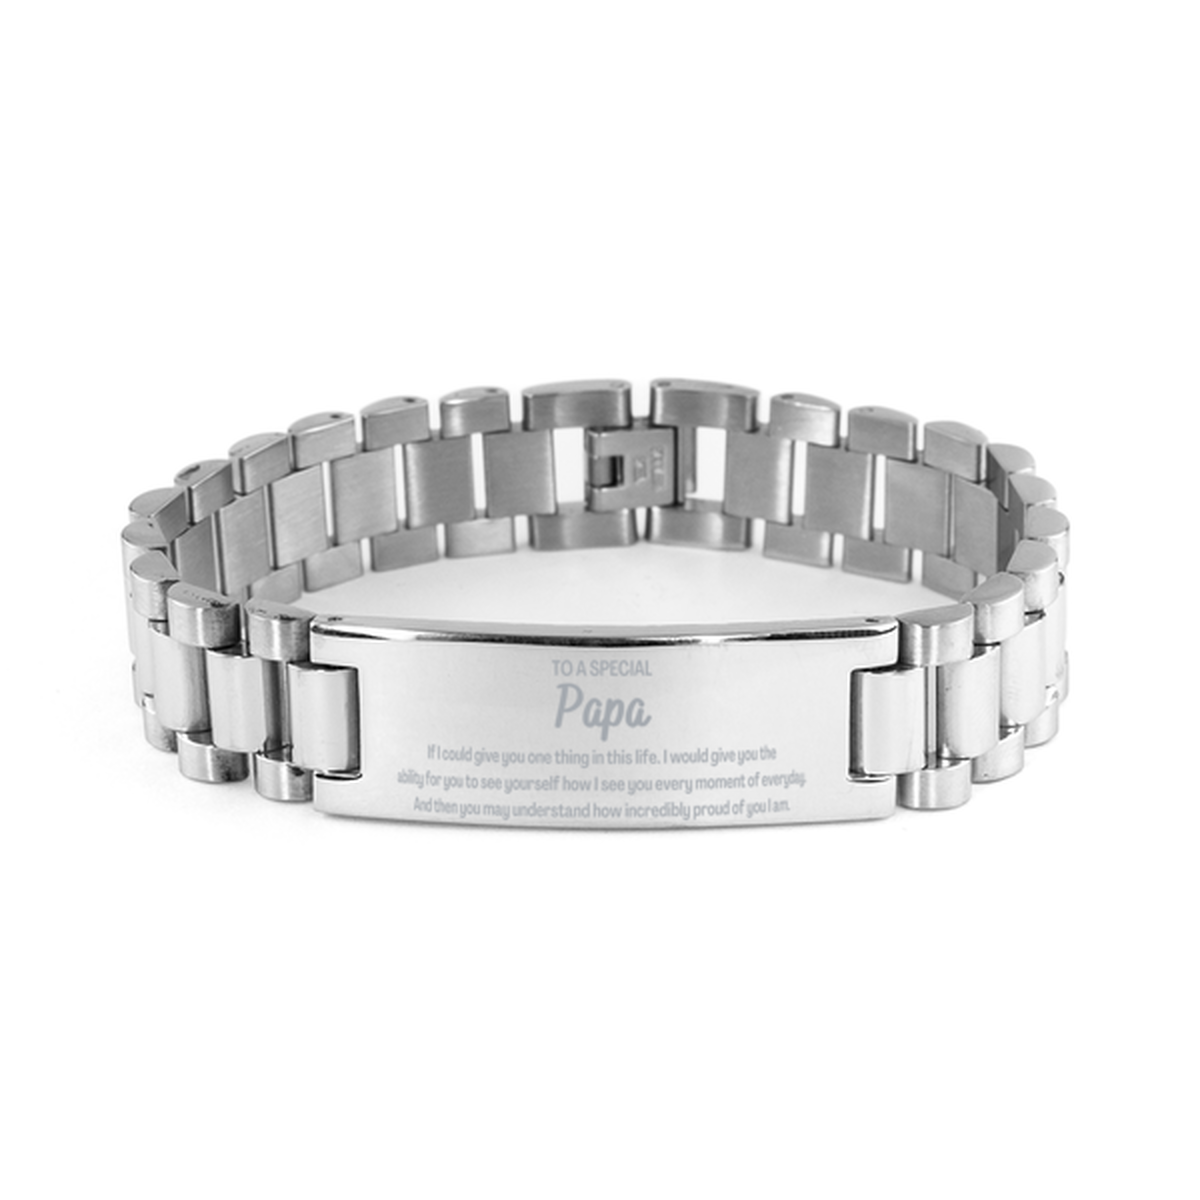 To My Papa Ladder Stainless Steel Bracelet, Gifts For Papa Engraved, Inspirational Gifts for Christmas Birthday, Epic Gifts for Papa To A Special Papa how incredibly proud of you I am